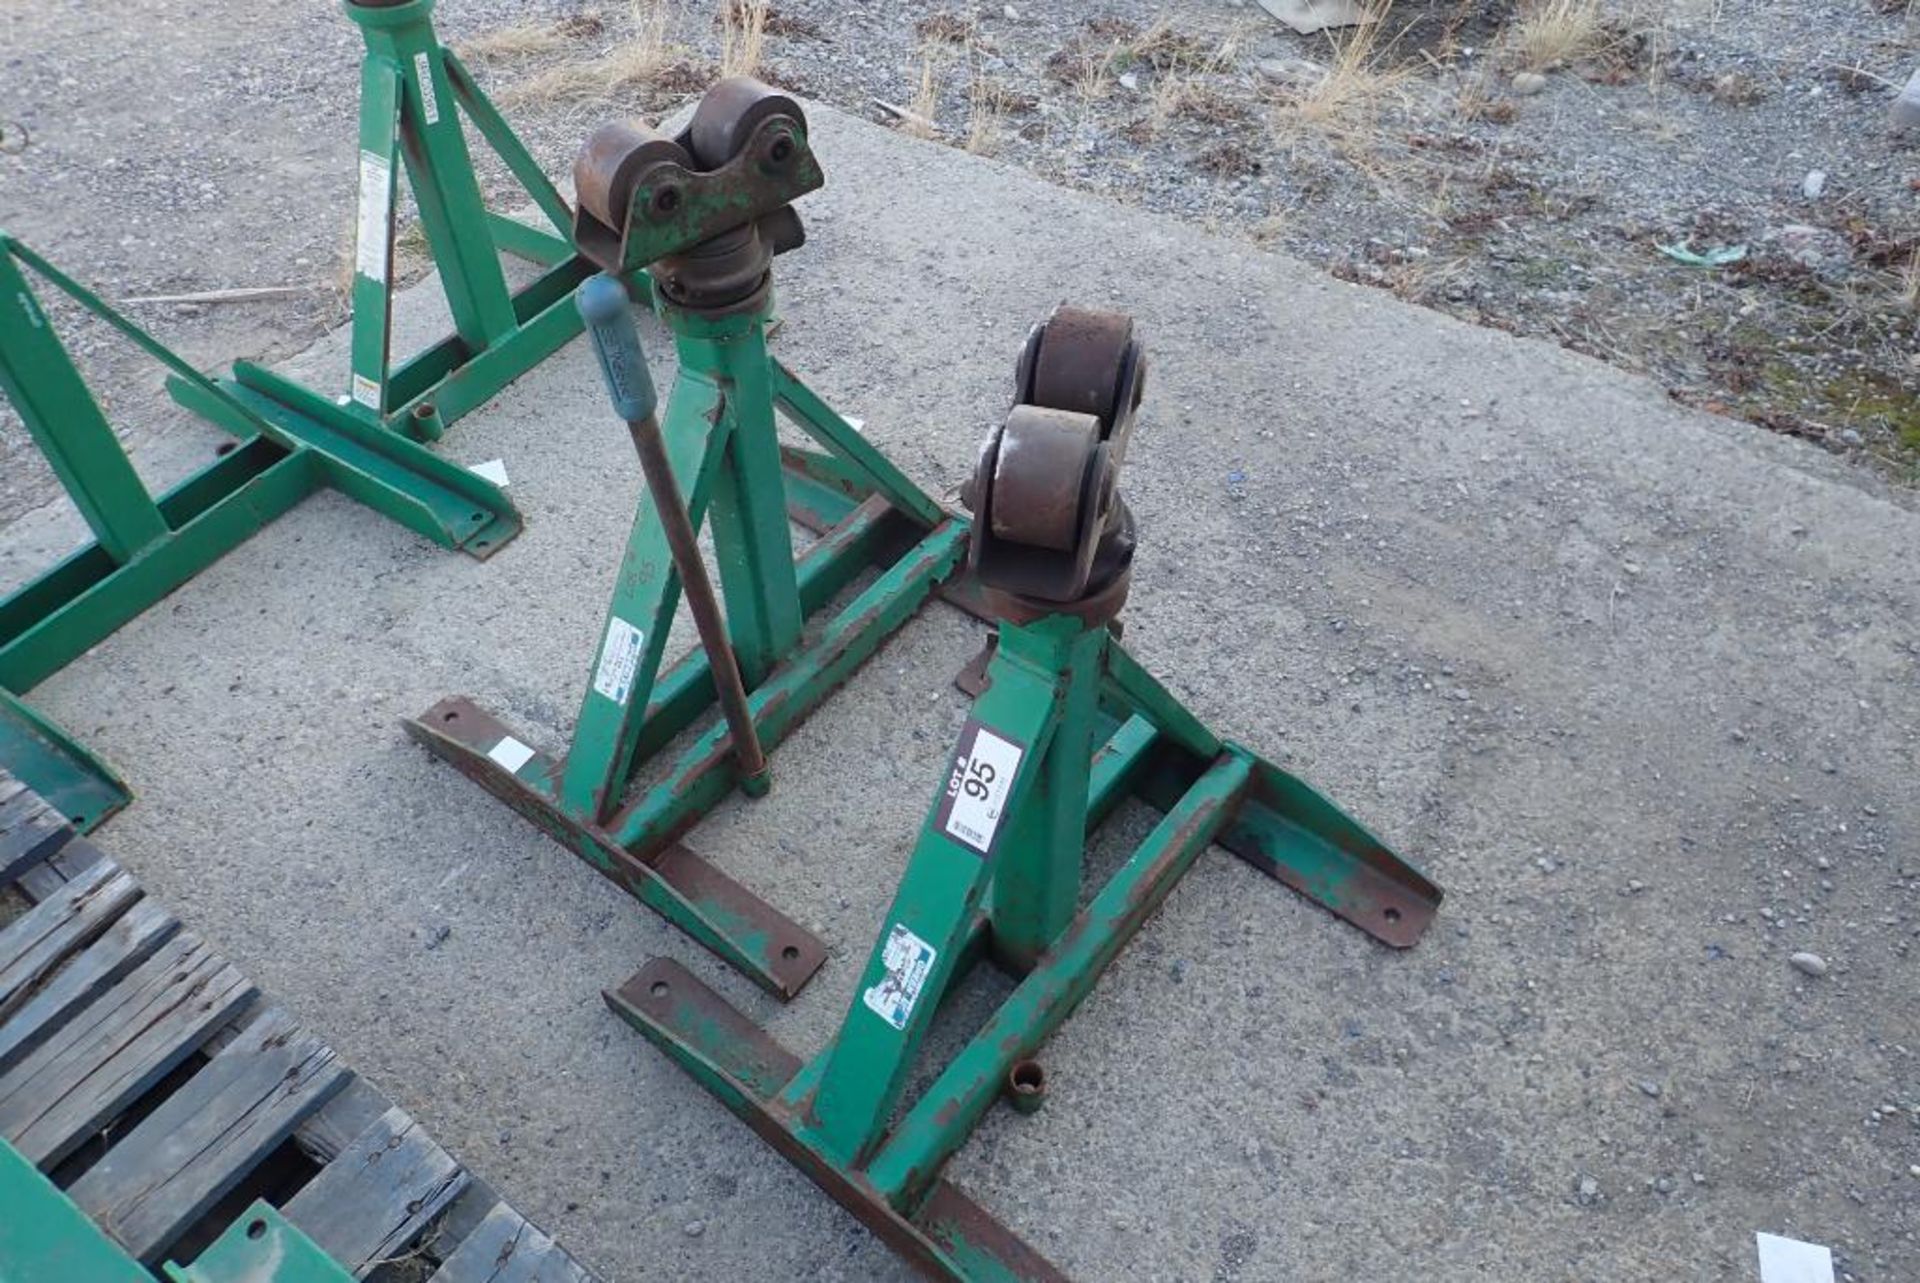 Lot of 2 Greenlee 656 Pipe Stands.